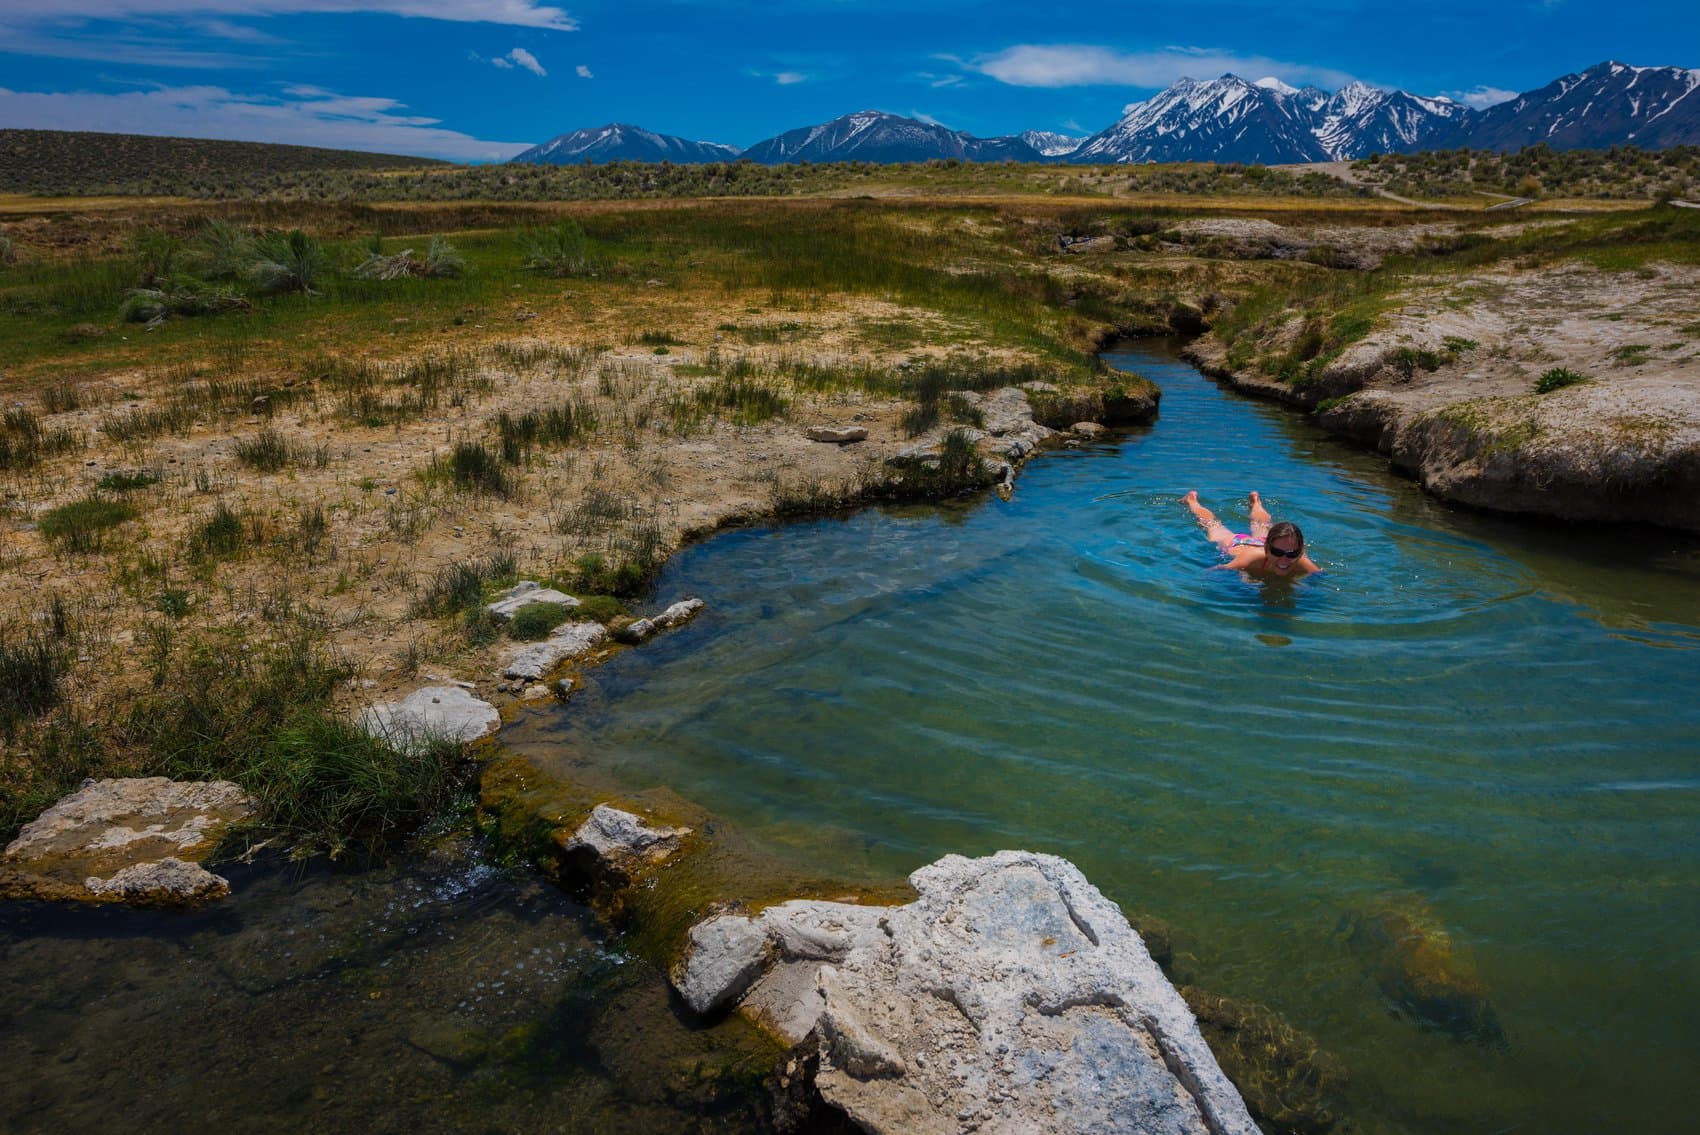 The Temperature Of The Hot Springs In Inyo National Forest Can Reach Up To 105 Degrees